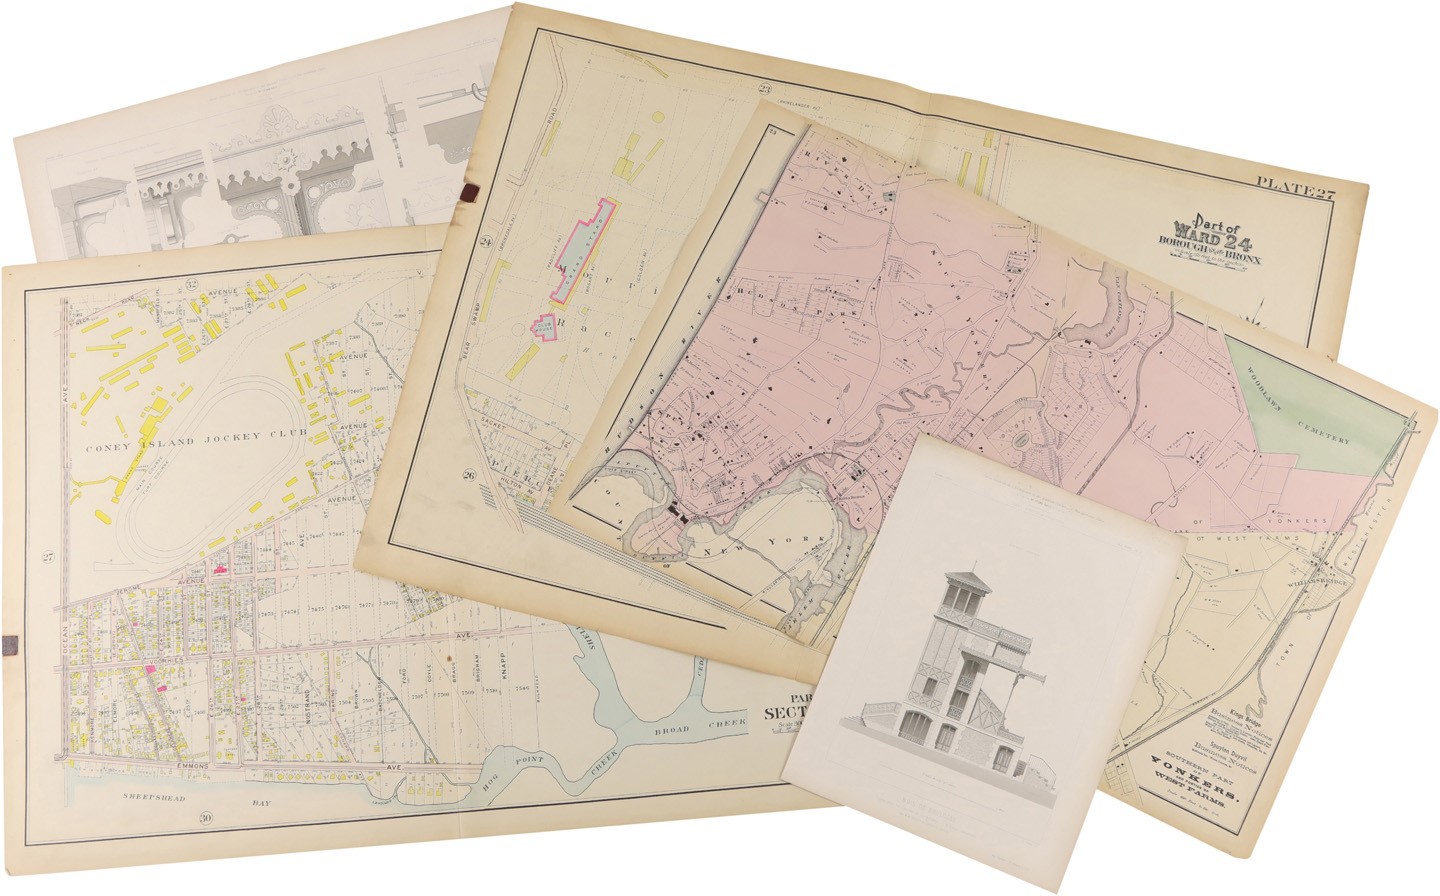 Horse Racing - Original Color Maps of Racing’s Notable Three Early Racetracks & Five 1896 Architectural Prints of Longchamps Racecourse (8)